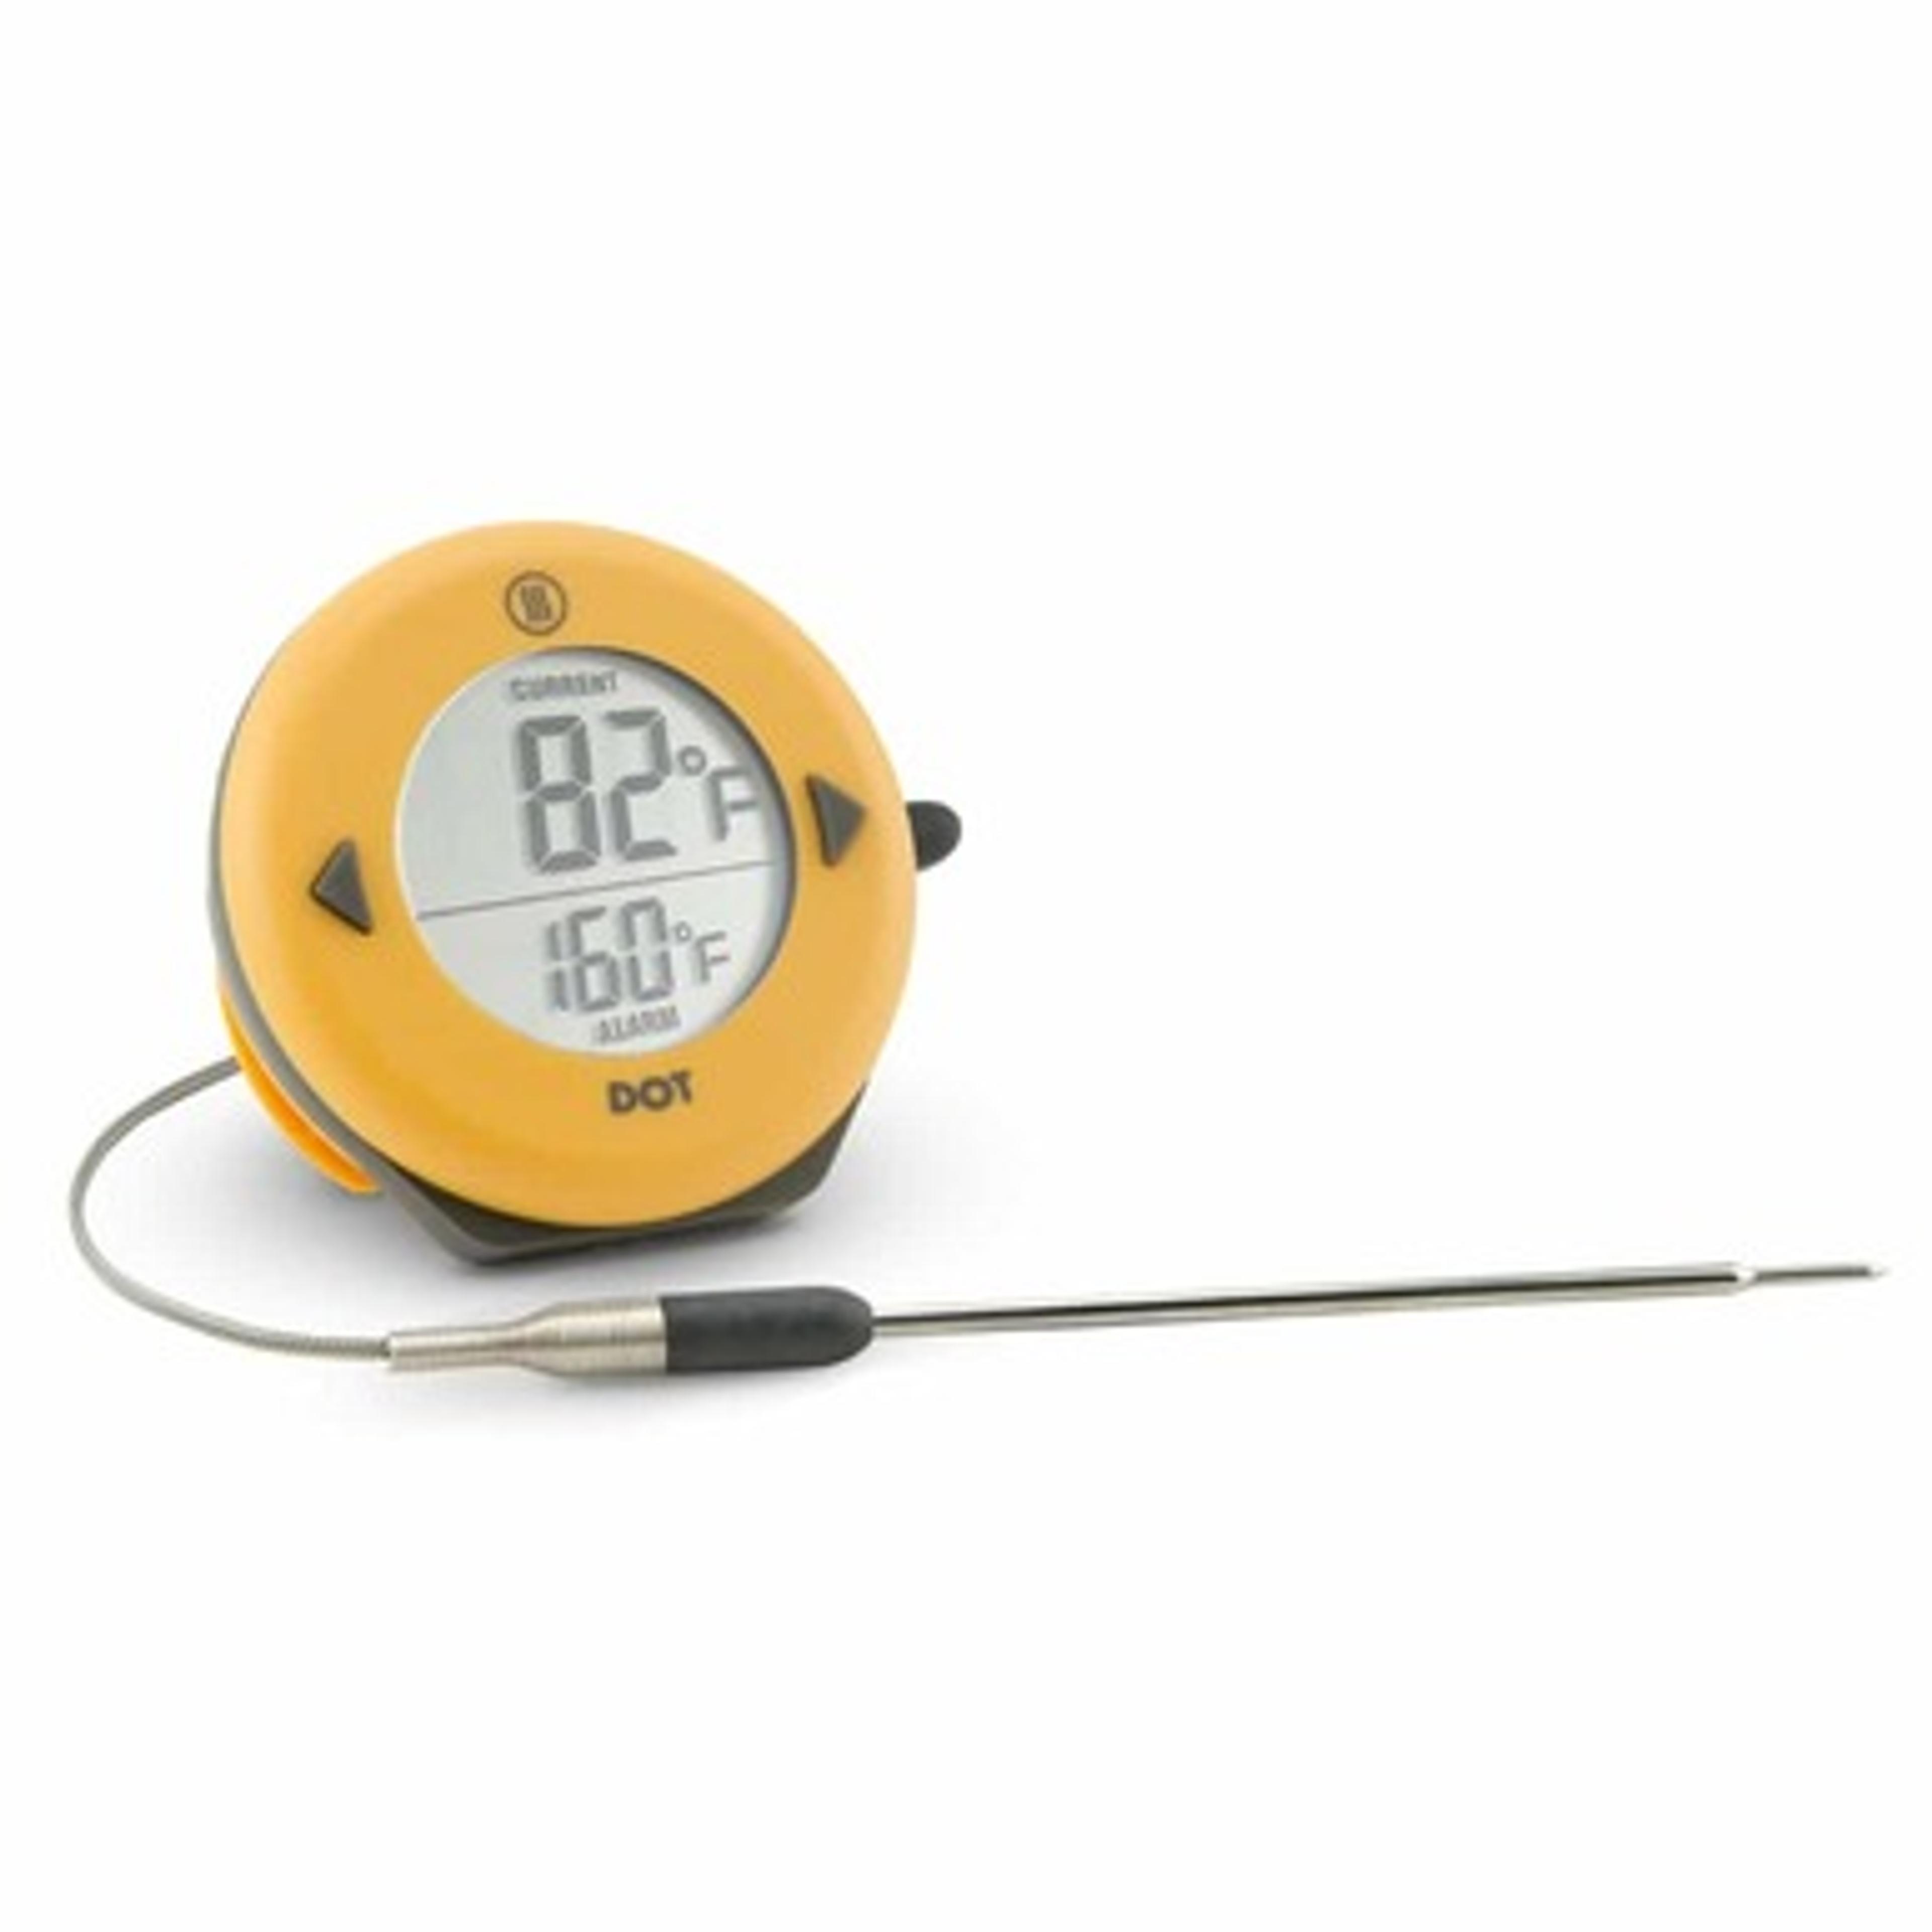 DOT Simple Alarm Thermometer|ThermoWorks